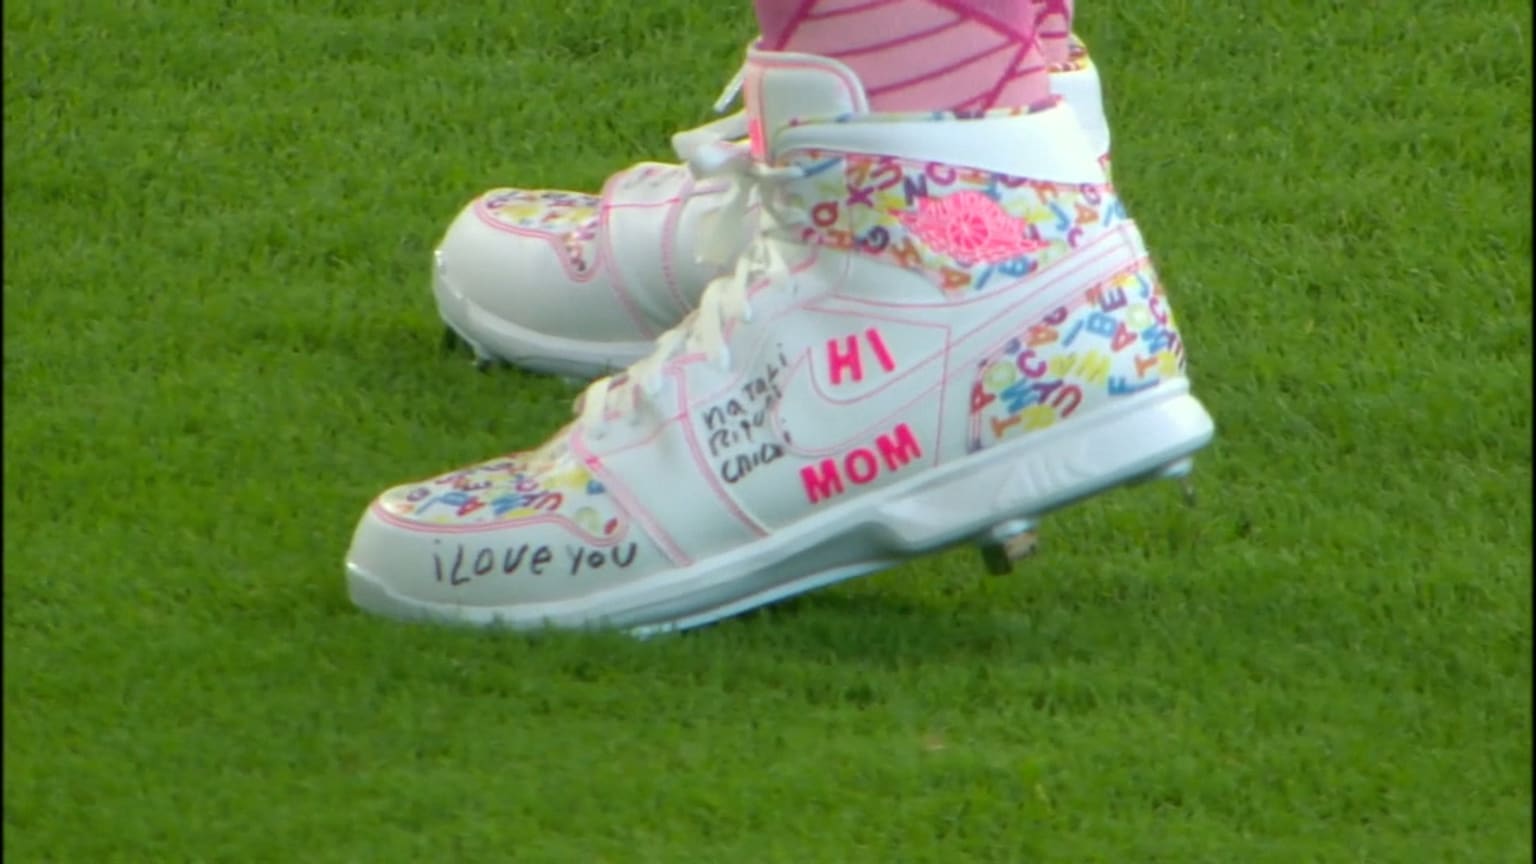 Blue Jays wear pink to pay tribute to moms